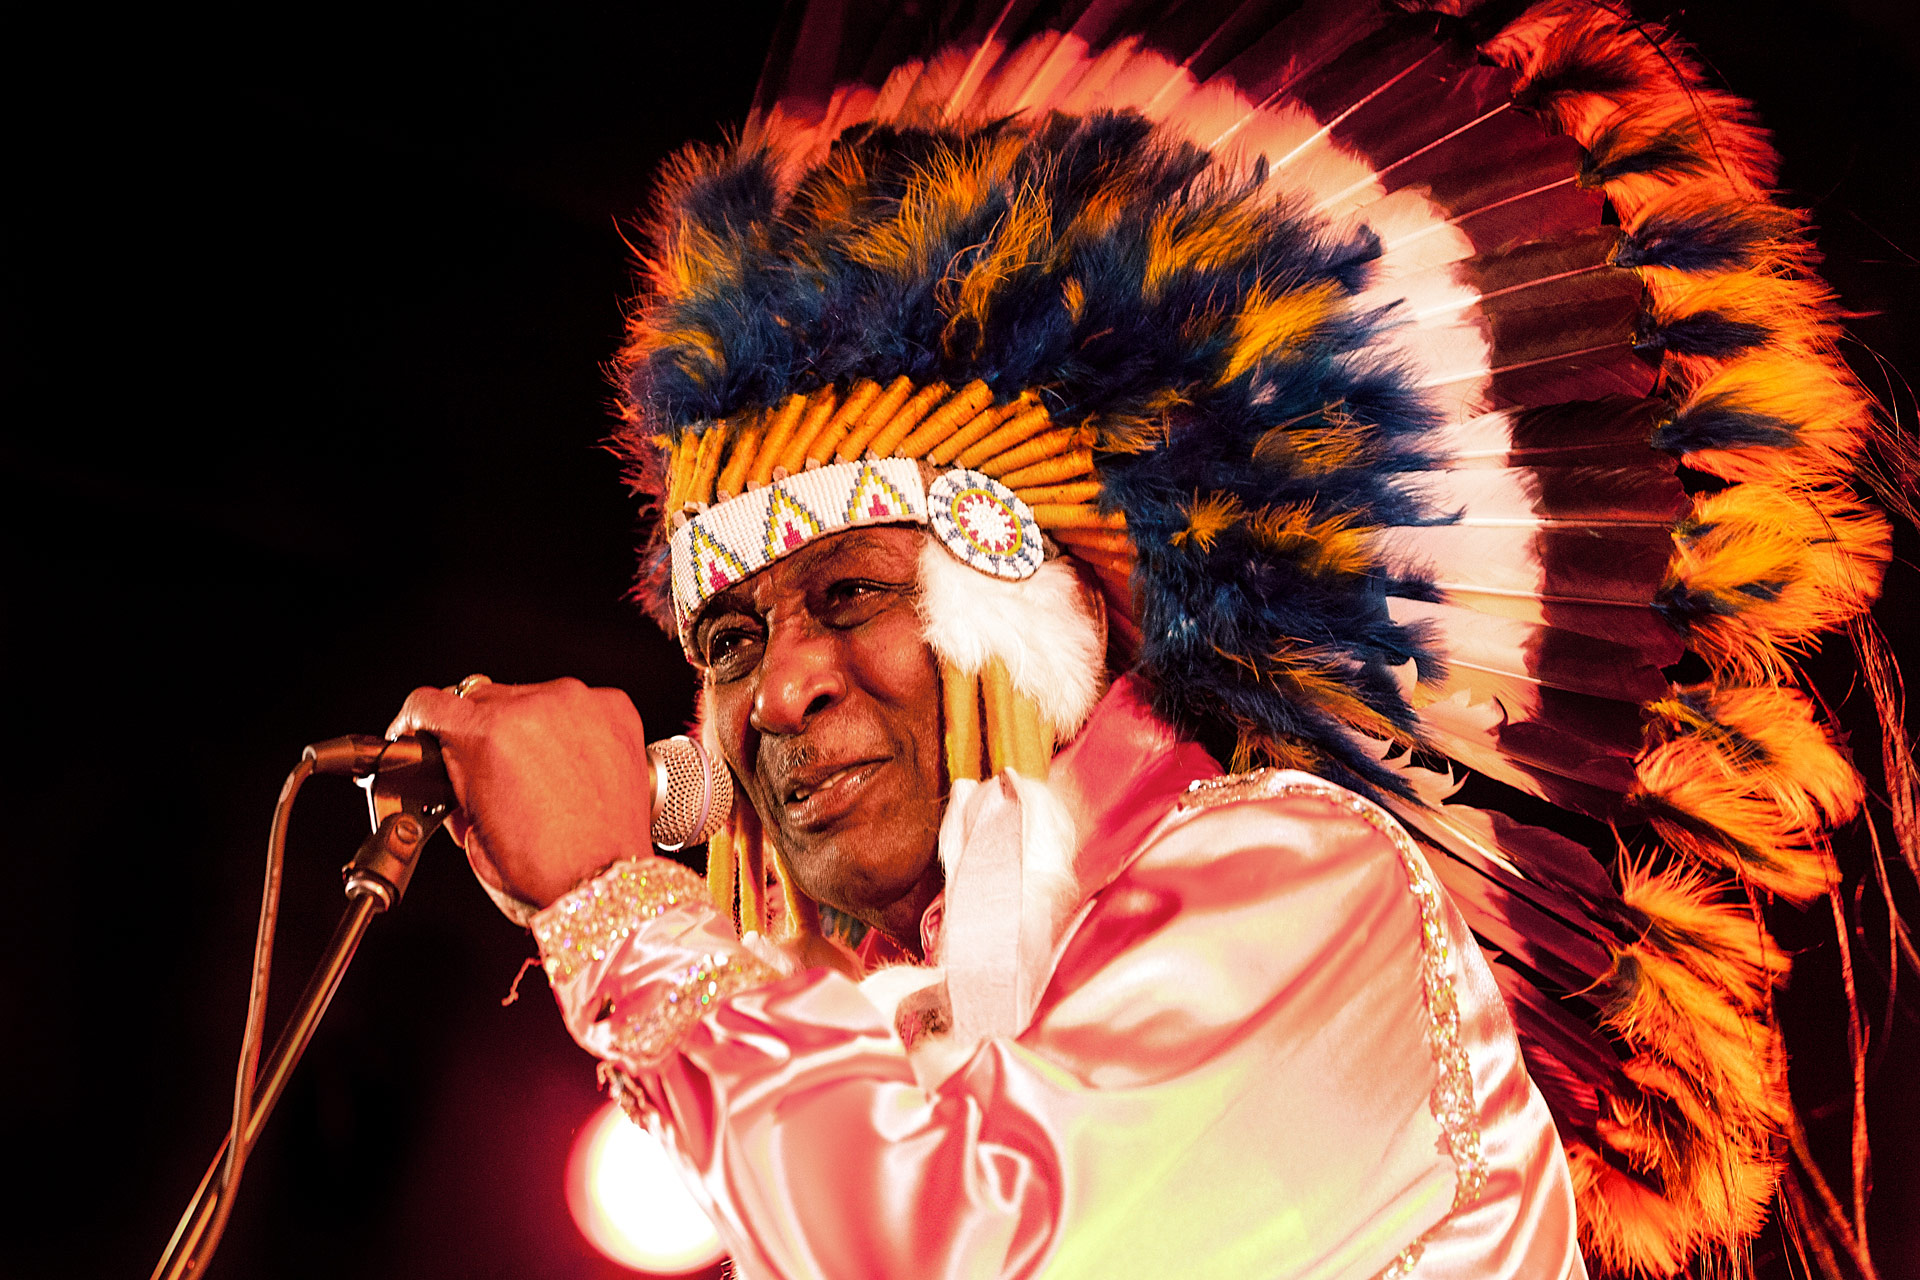 EDDY "THE CHIEF" CLEARWATER